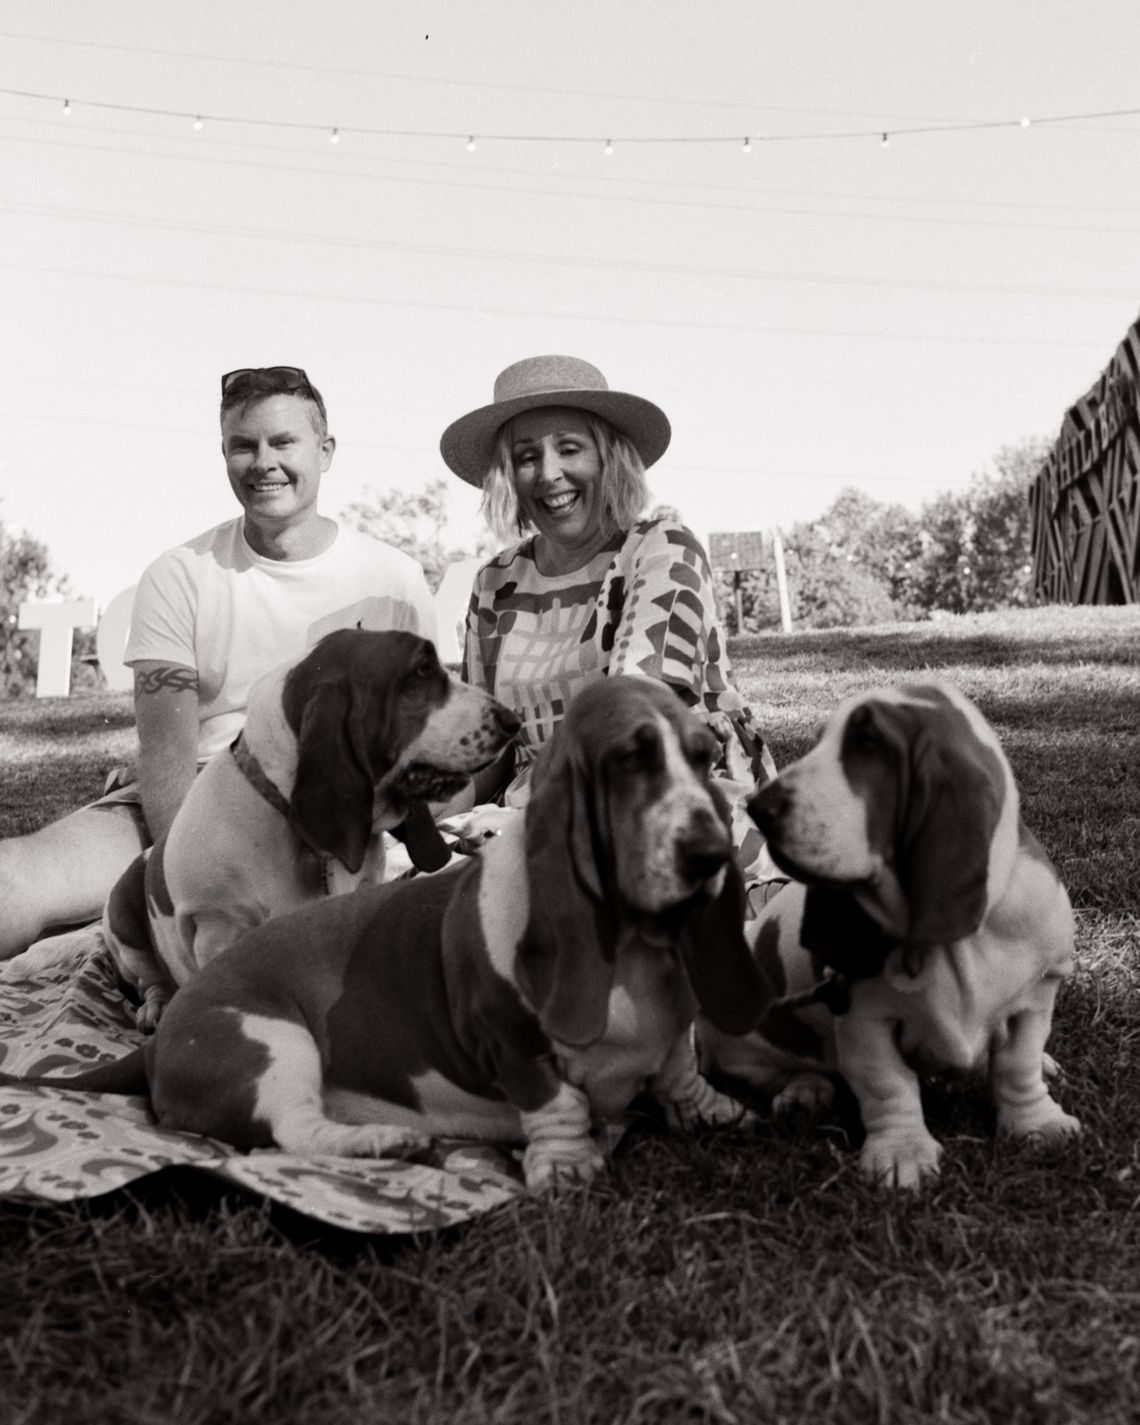 A man and a woman are seated on a rug behind three bassest hounds.